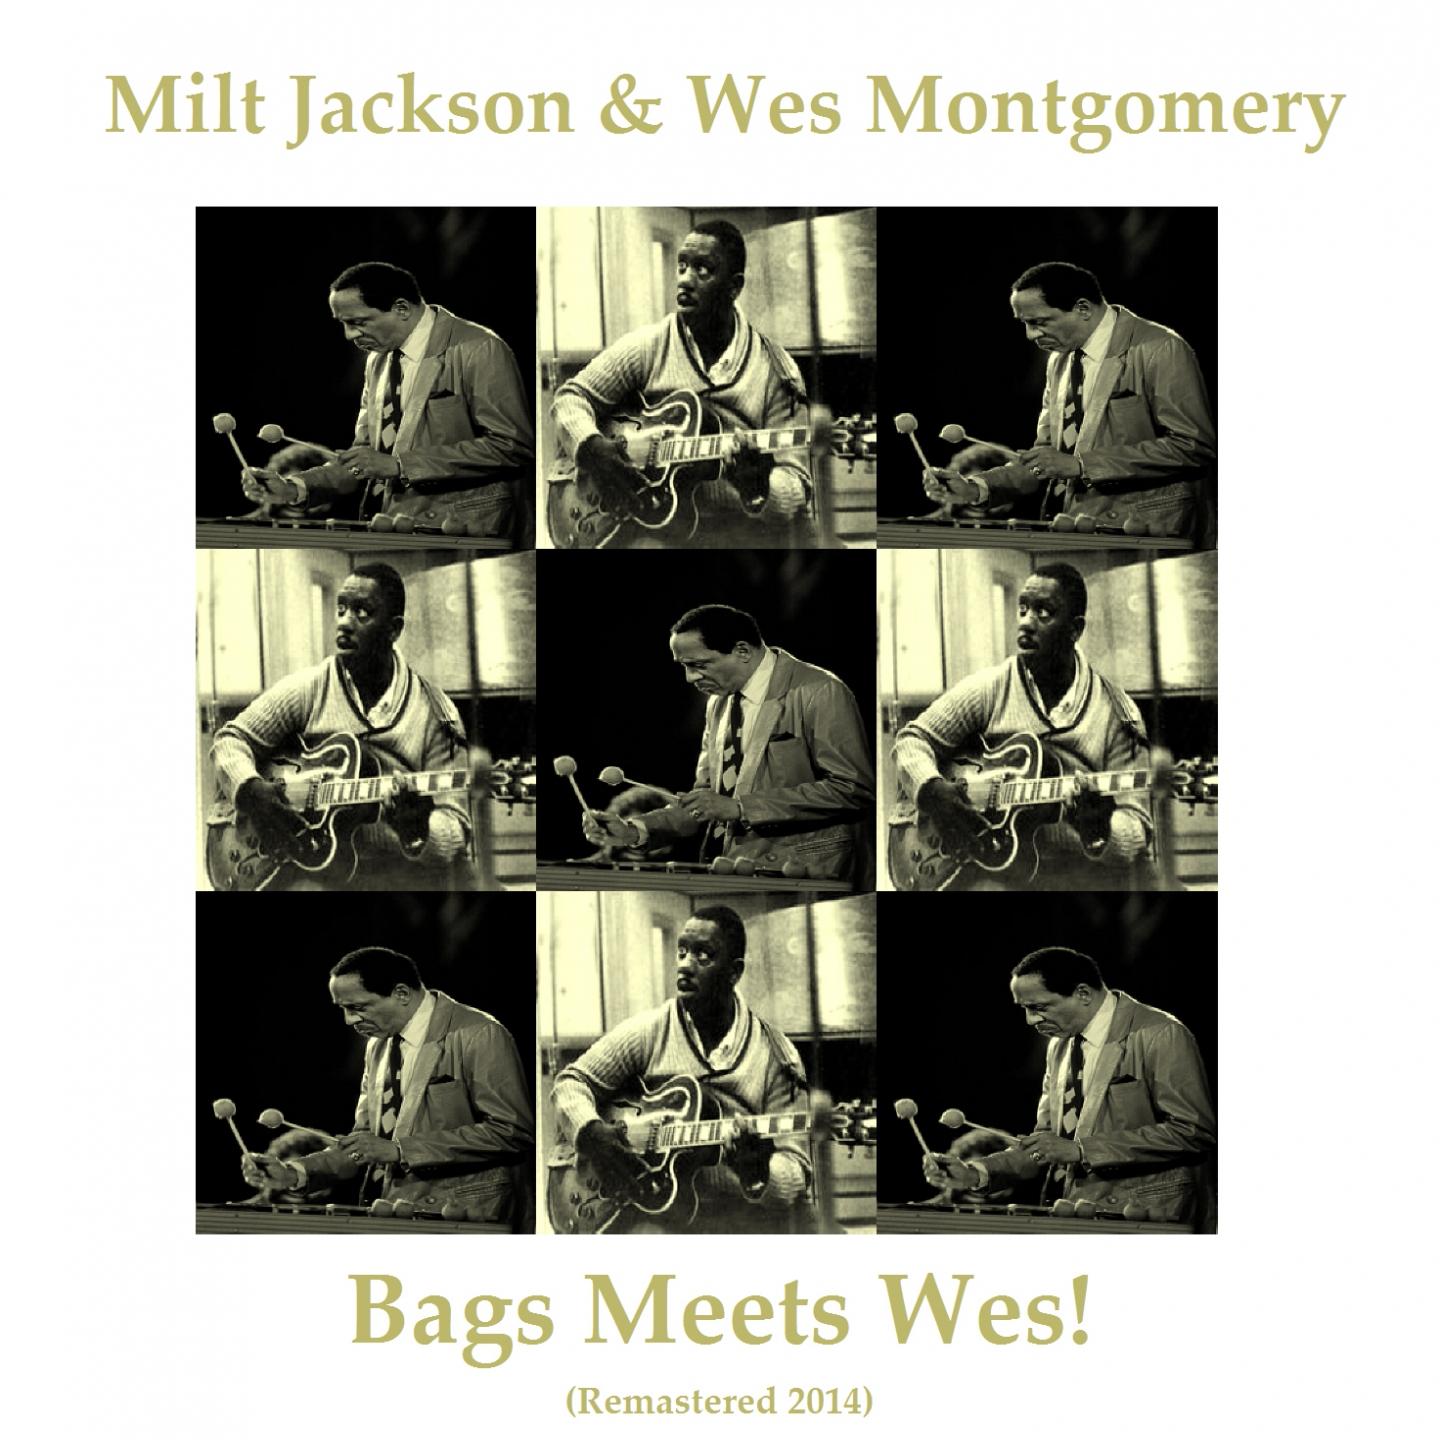 Bags Meets Wes! (Remastered 2014)